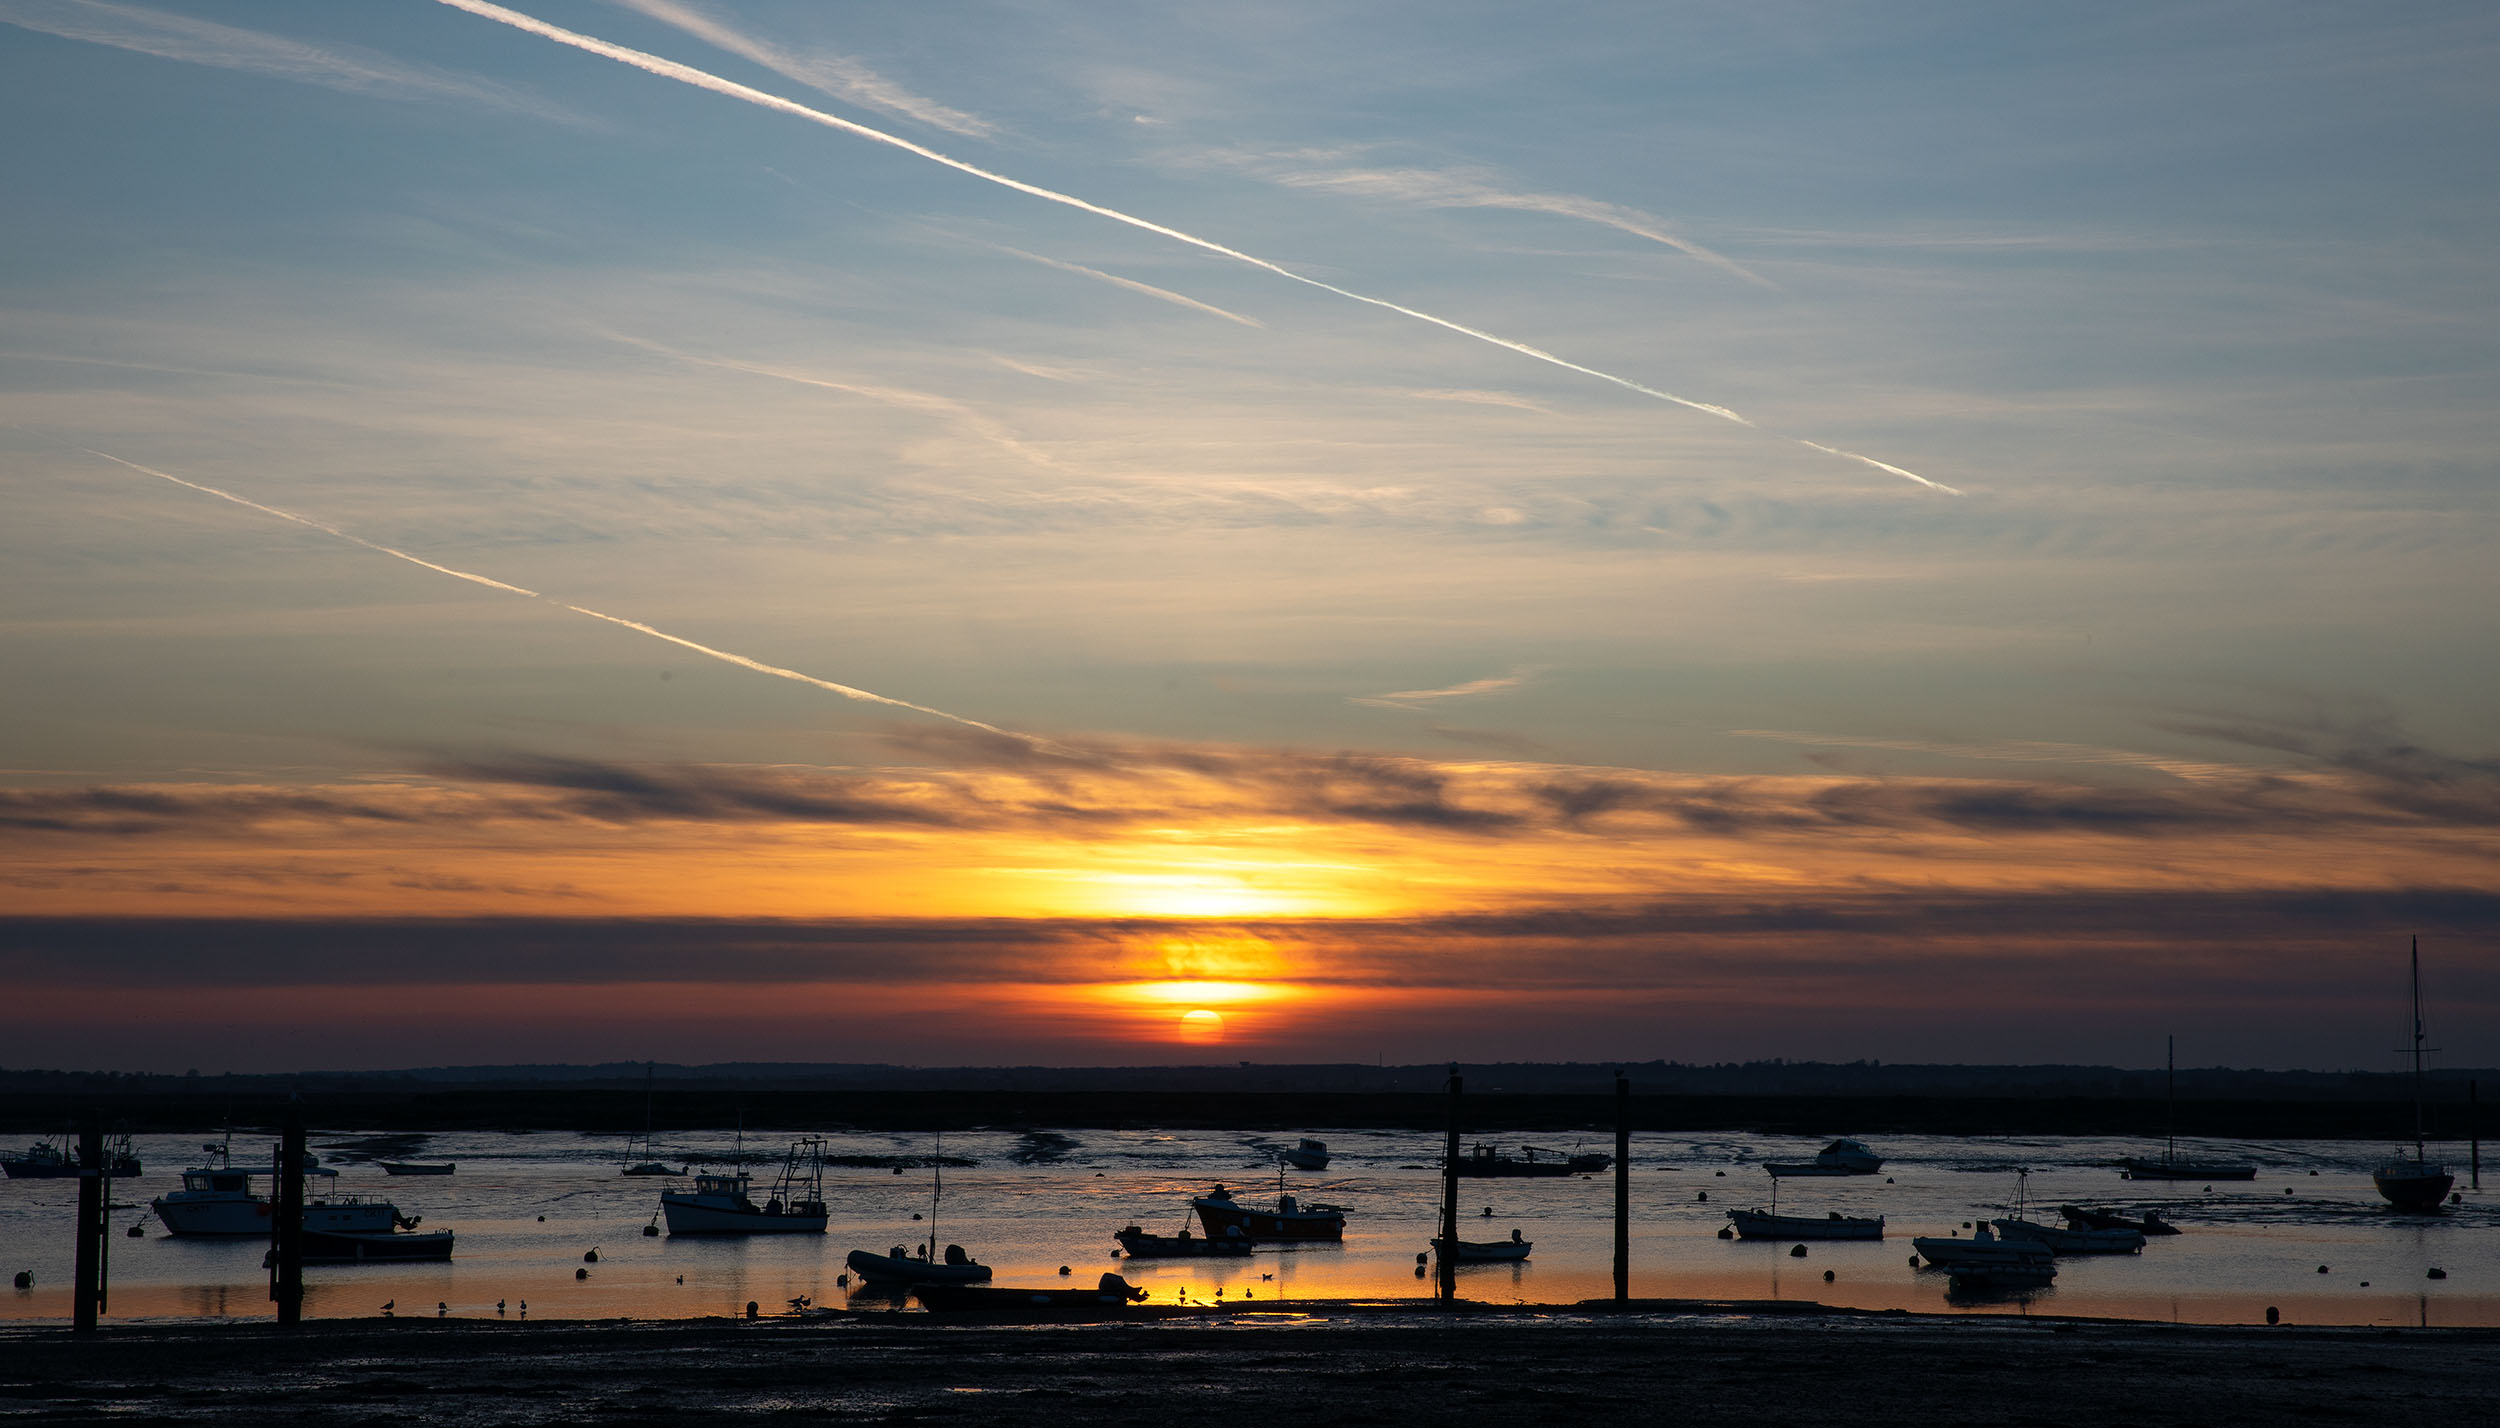 Photography by Amelia Sadd of the sunset at Mersea Island.